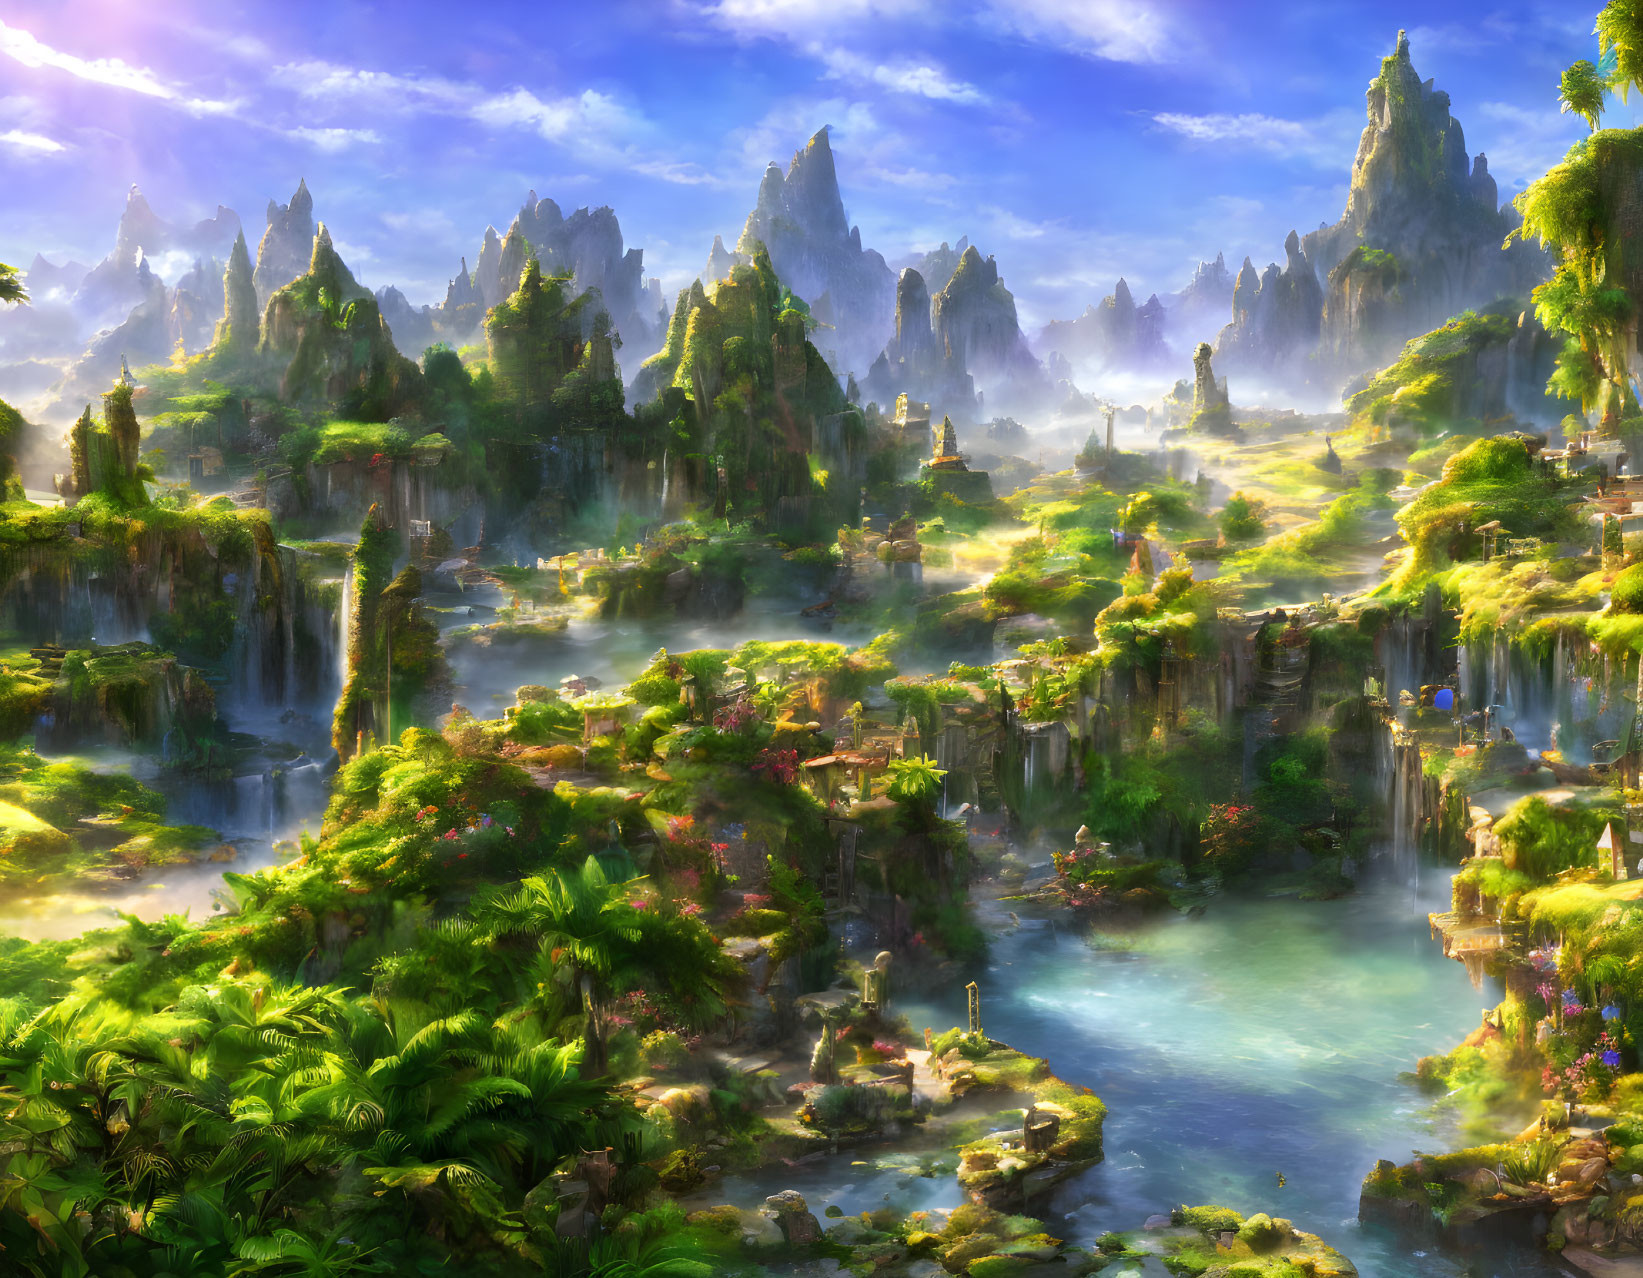 Fantasy landscape with waterfalls, greenery, rocks, and ruins